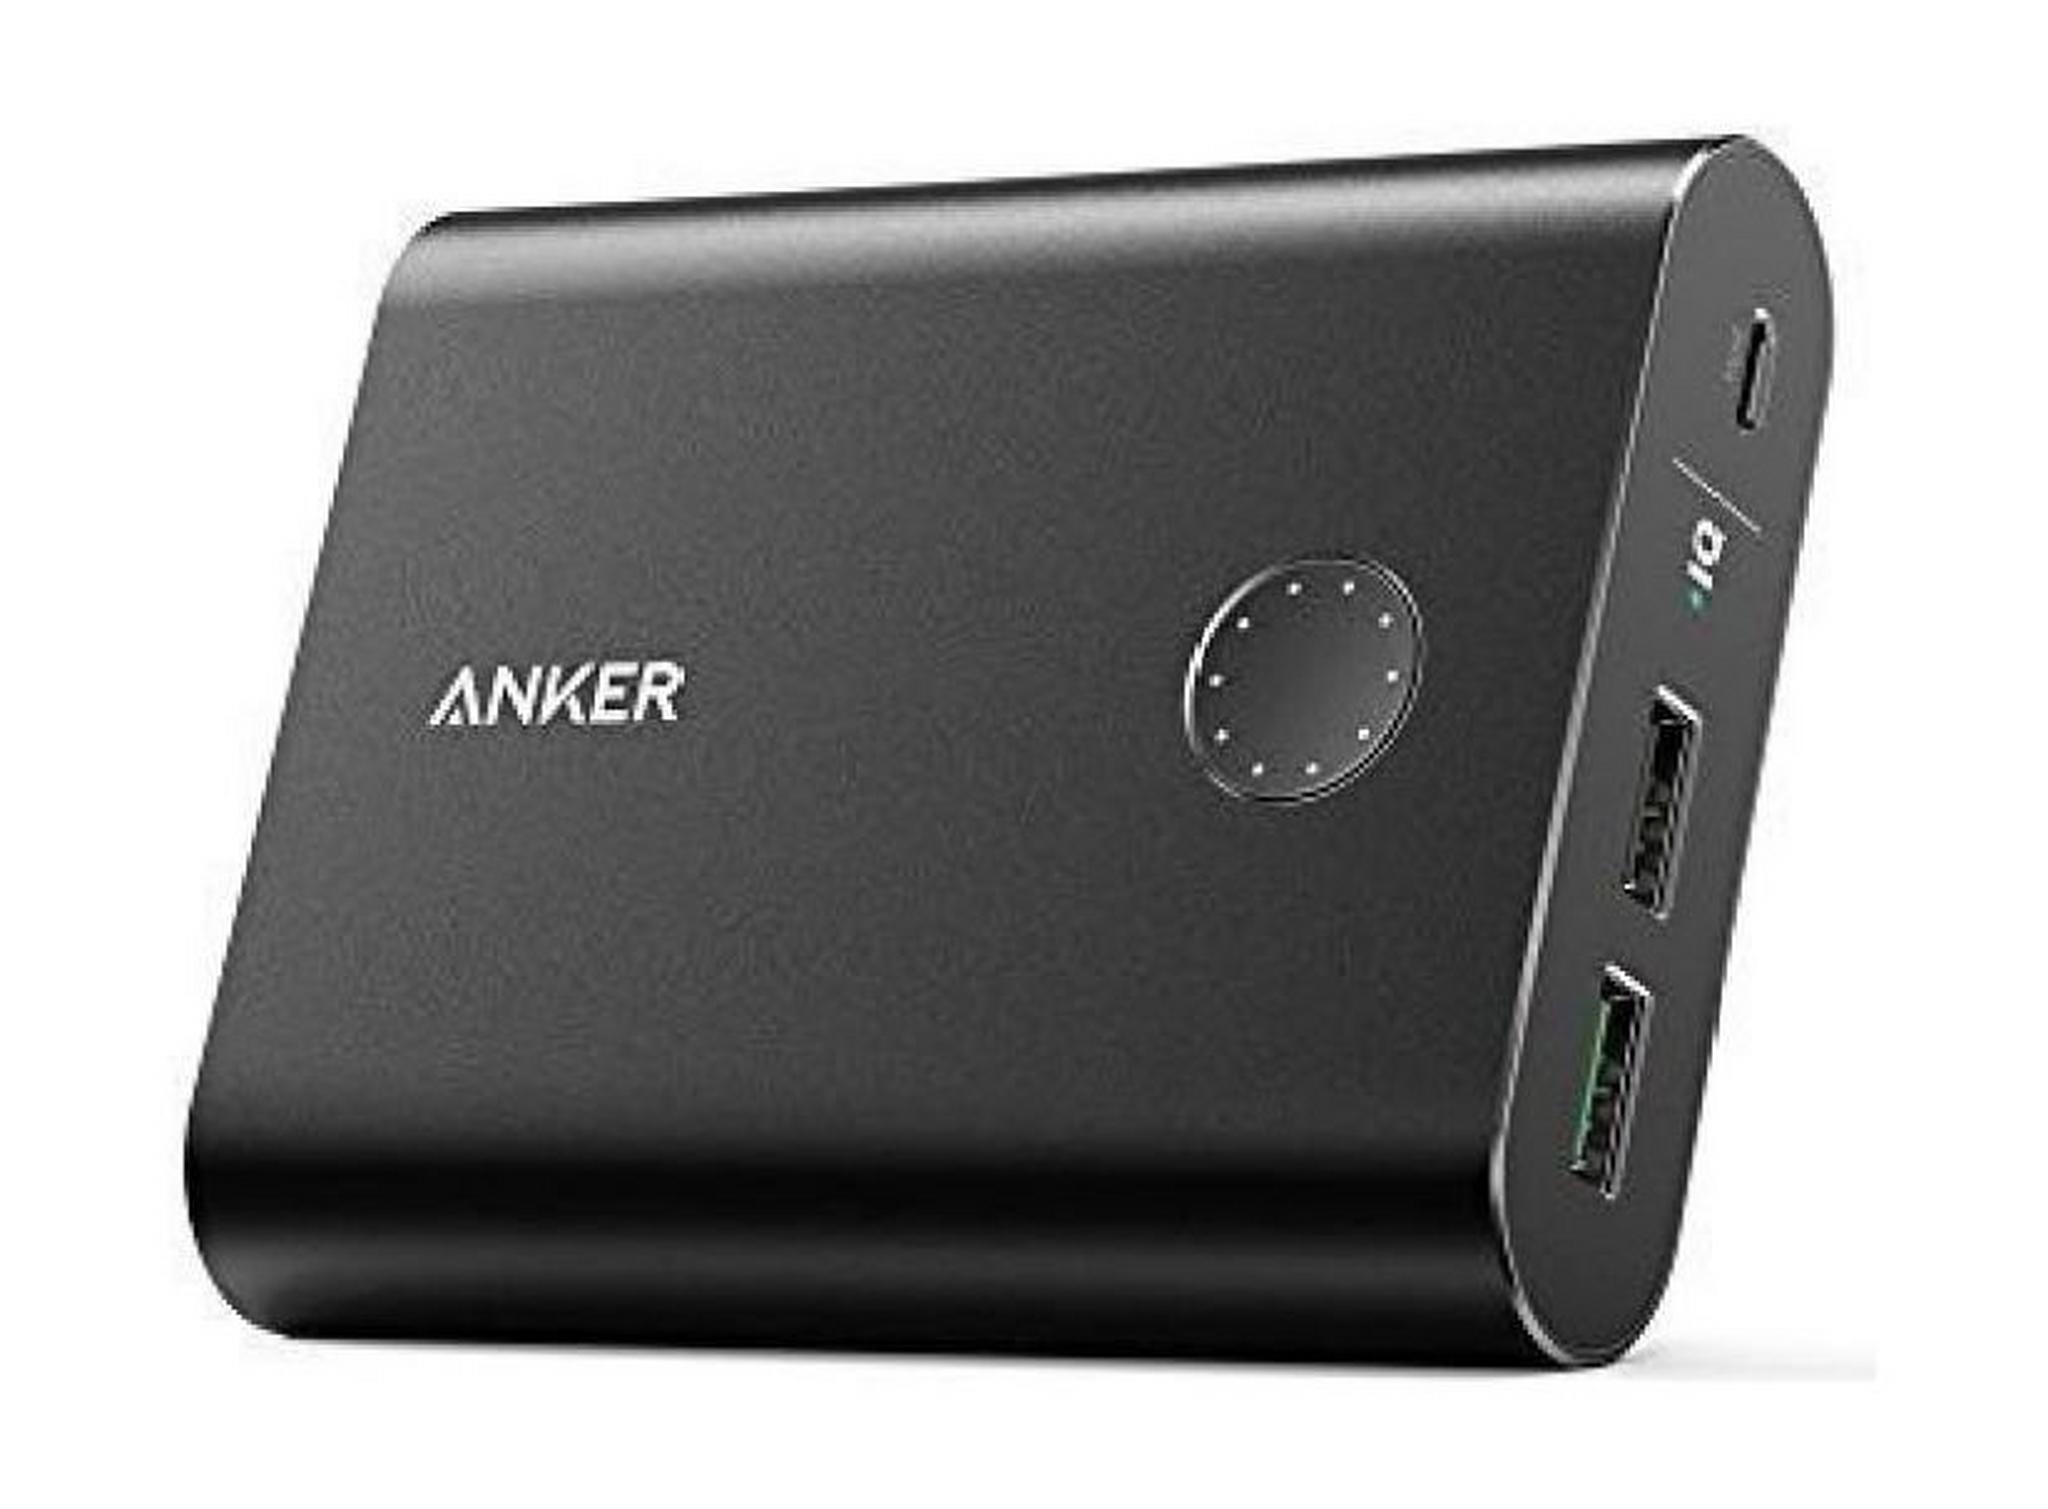 Anker PowerCore+ 13,400 mAh 3.0 Quick Charge Power Bank (A1316H11) - Black